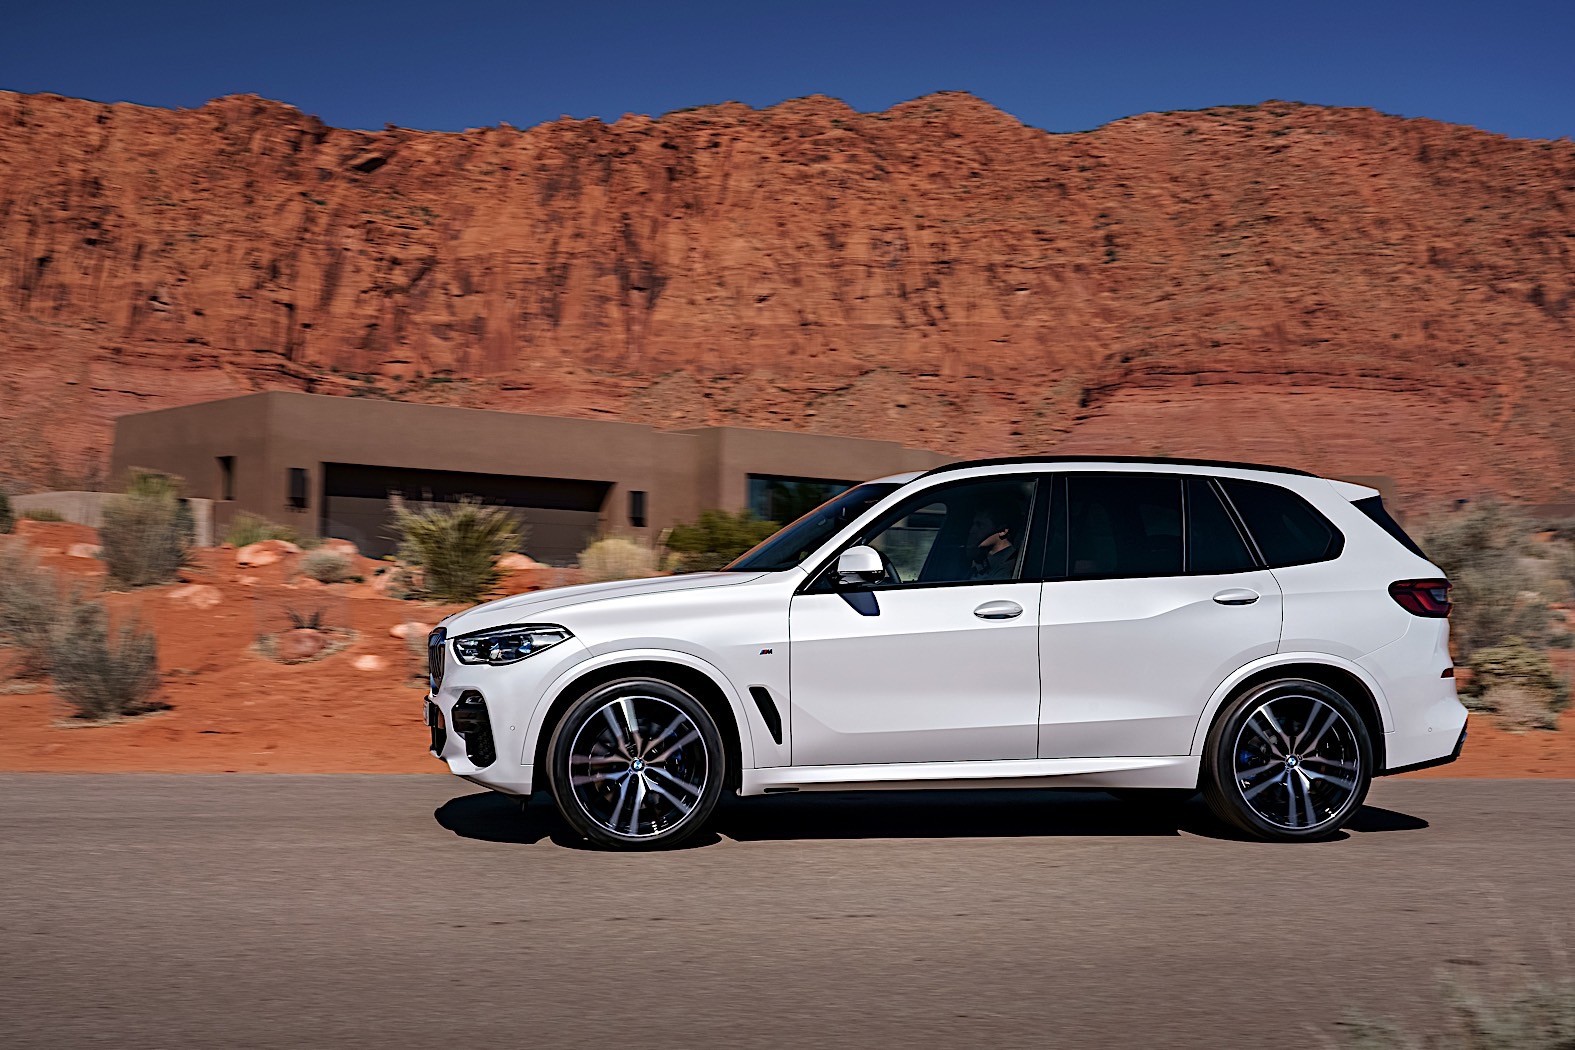 2019 BMW X5 iPerformance PlugIn Hybrid Comes with 50 Miles Electric